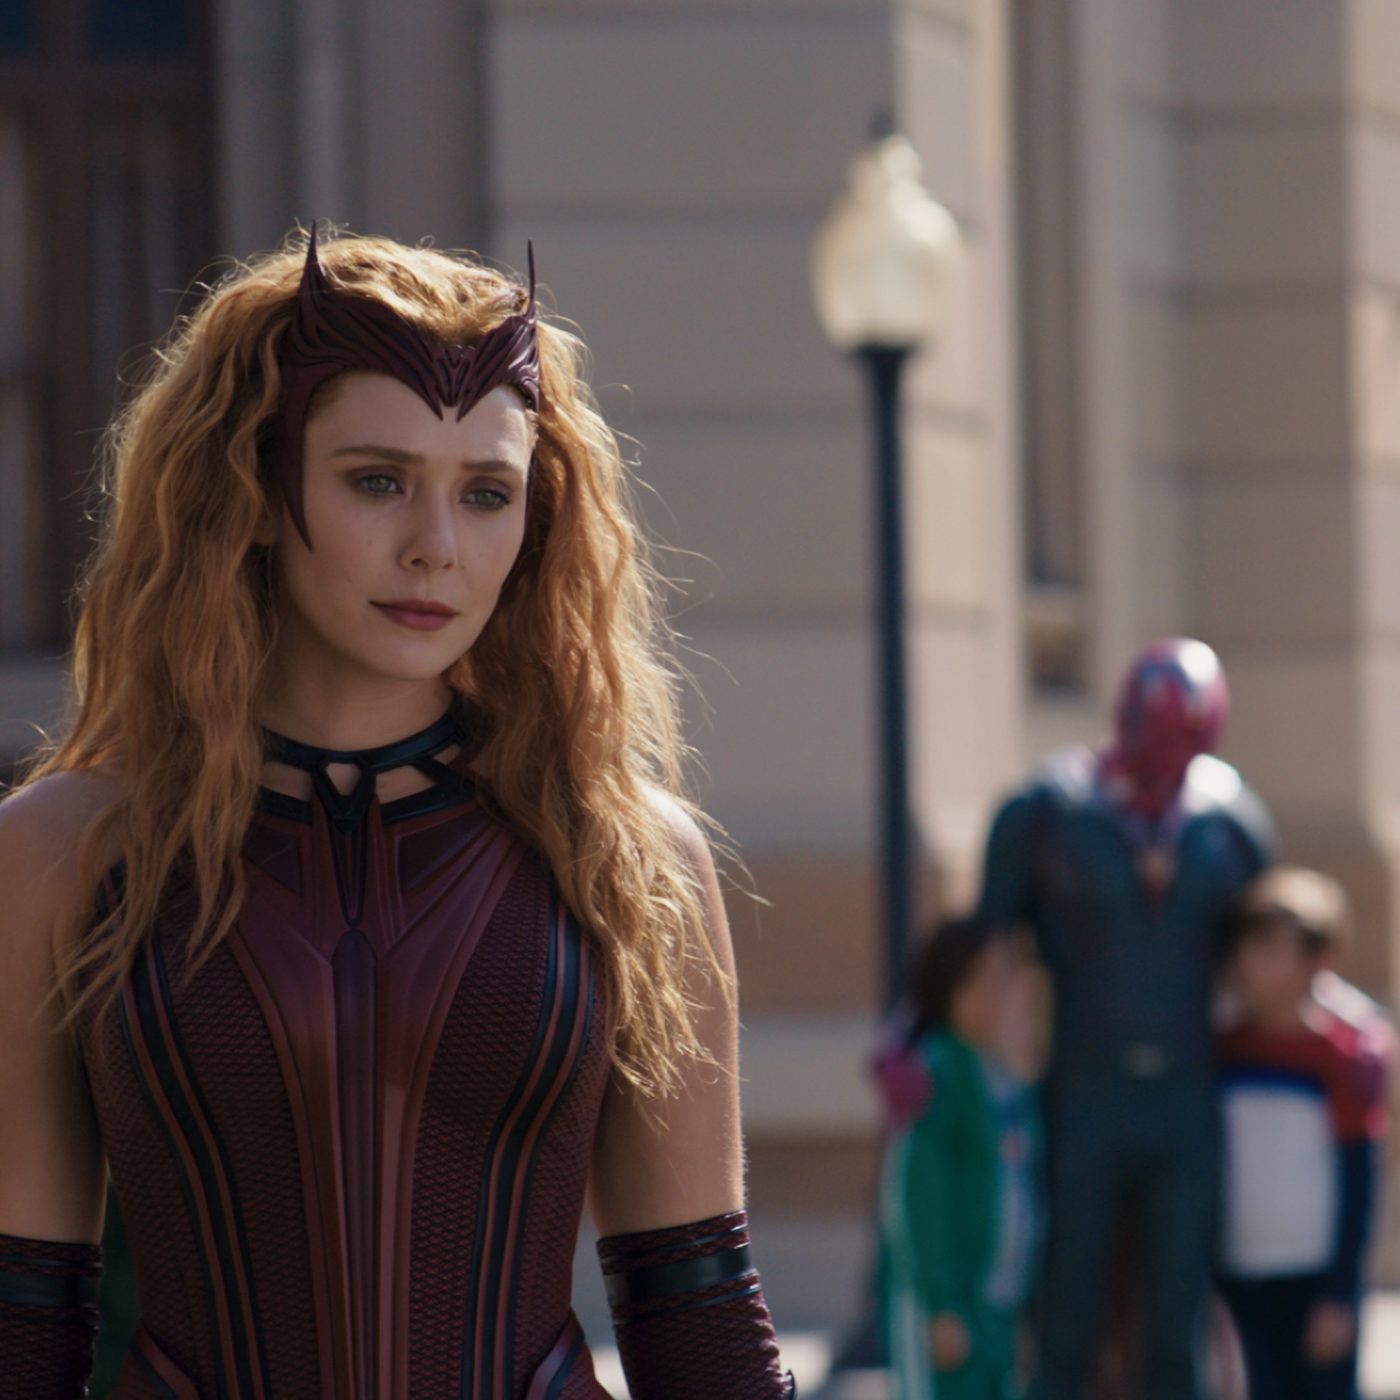 Marvel's Scarlet Witch Is Cancelled, But Not As We Know It